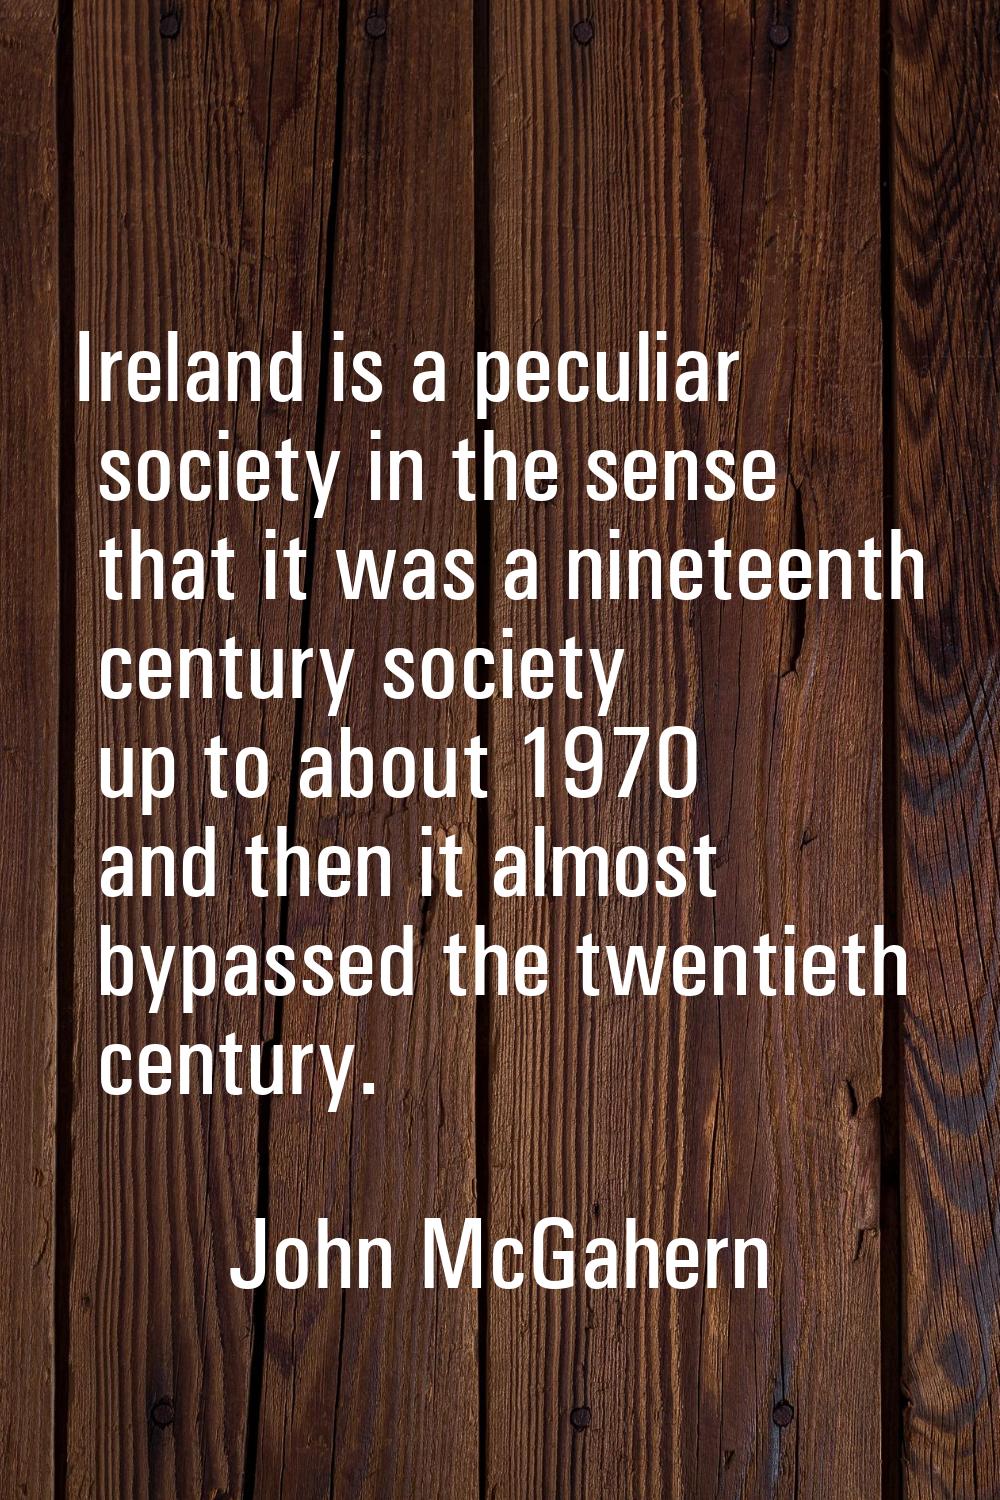 Ireland is a peculiar society in the sense that it was a nineteenth century society up to about 197